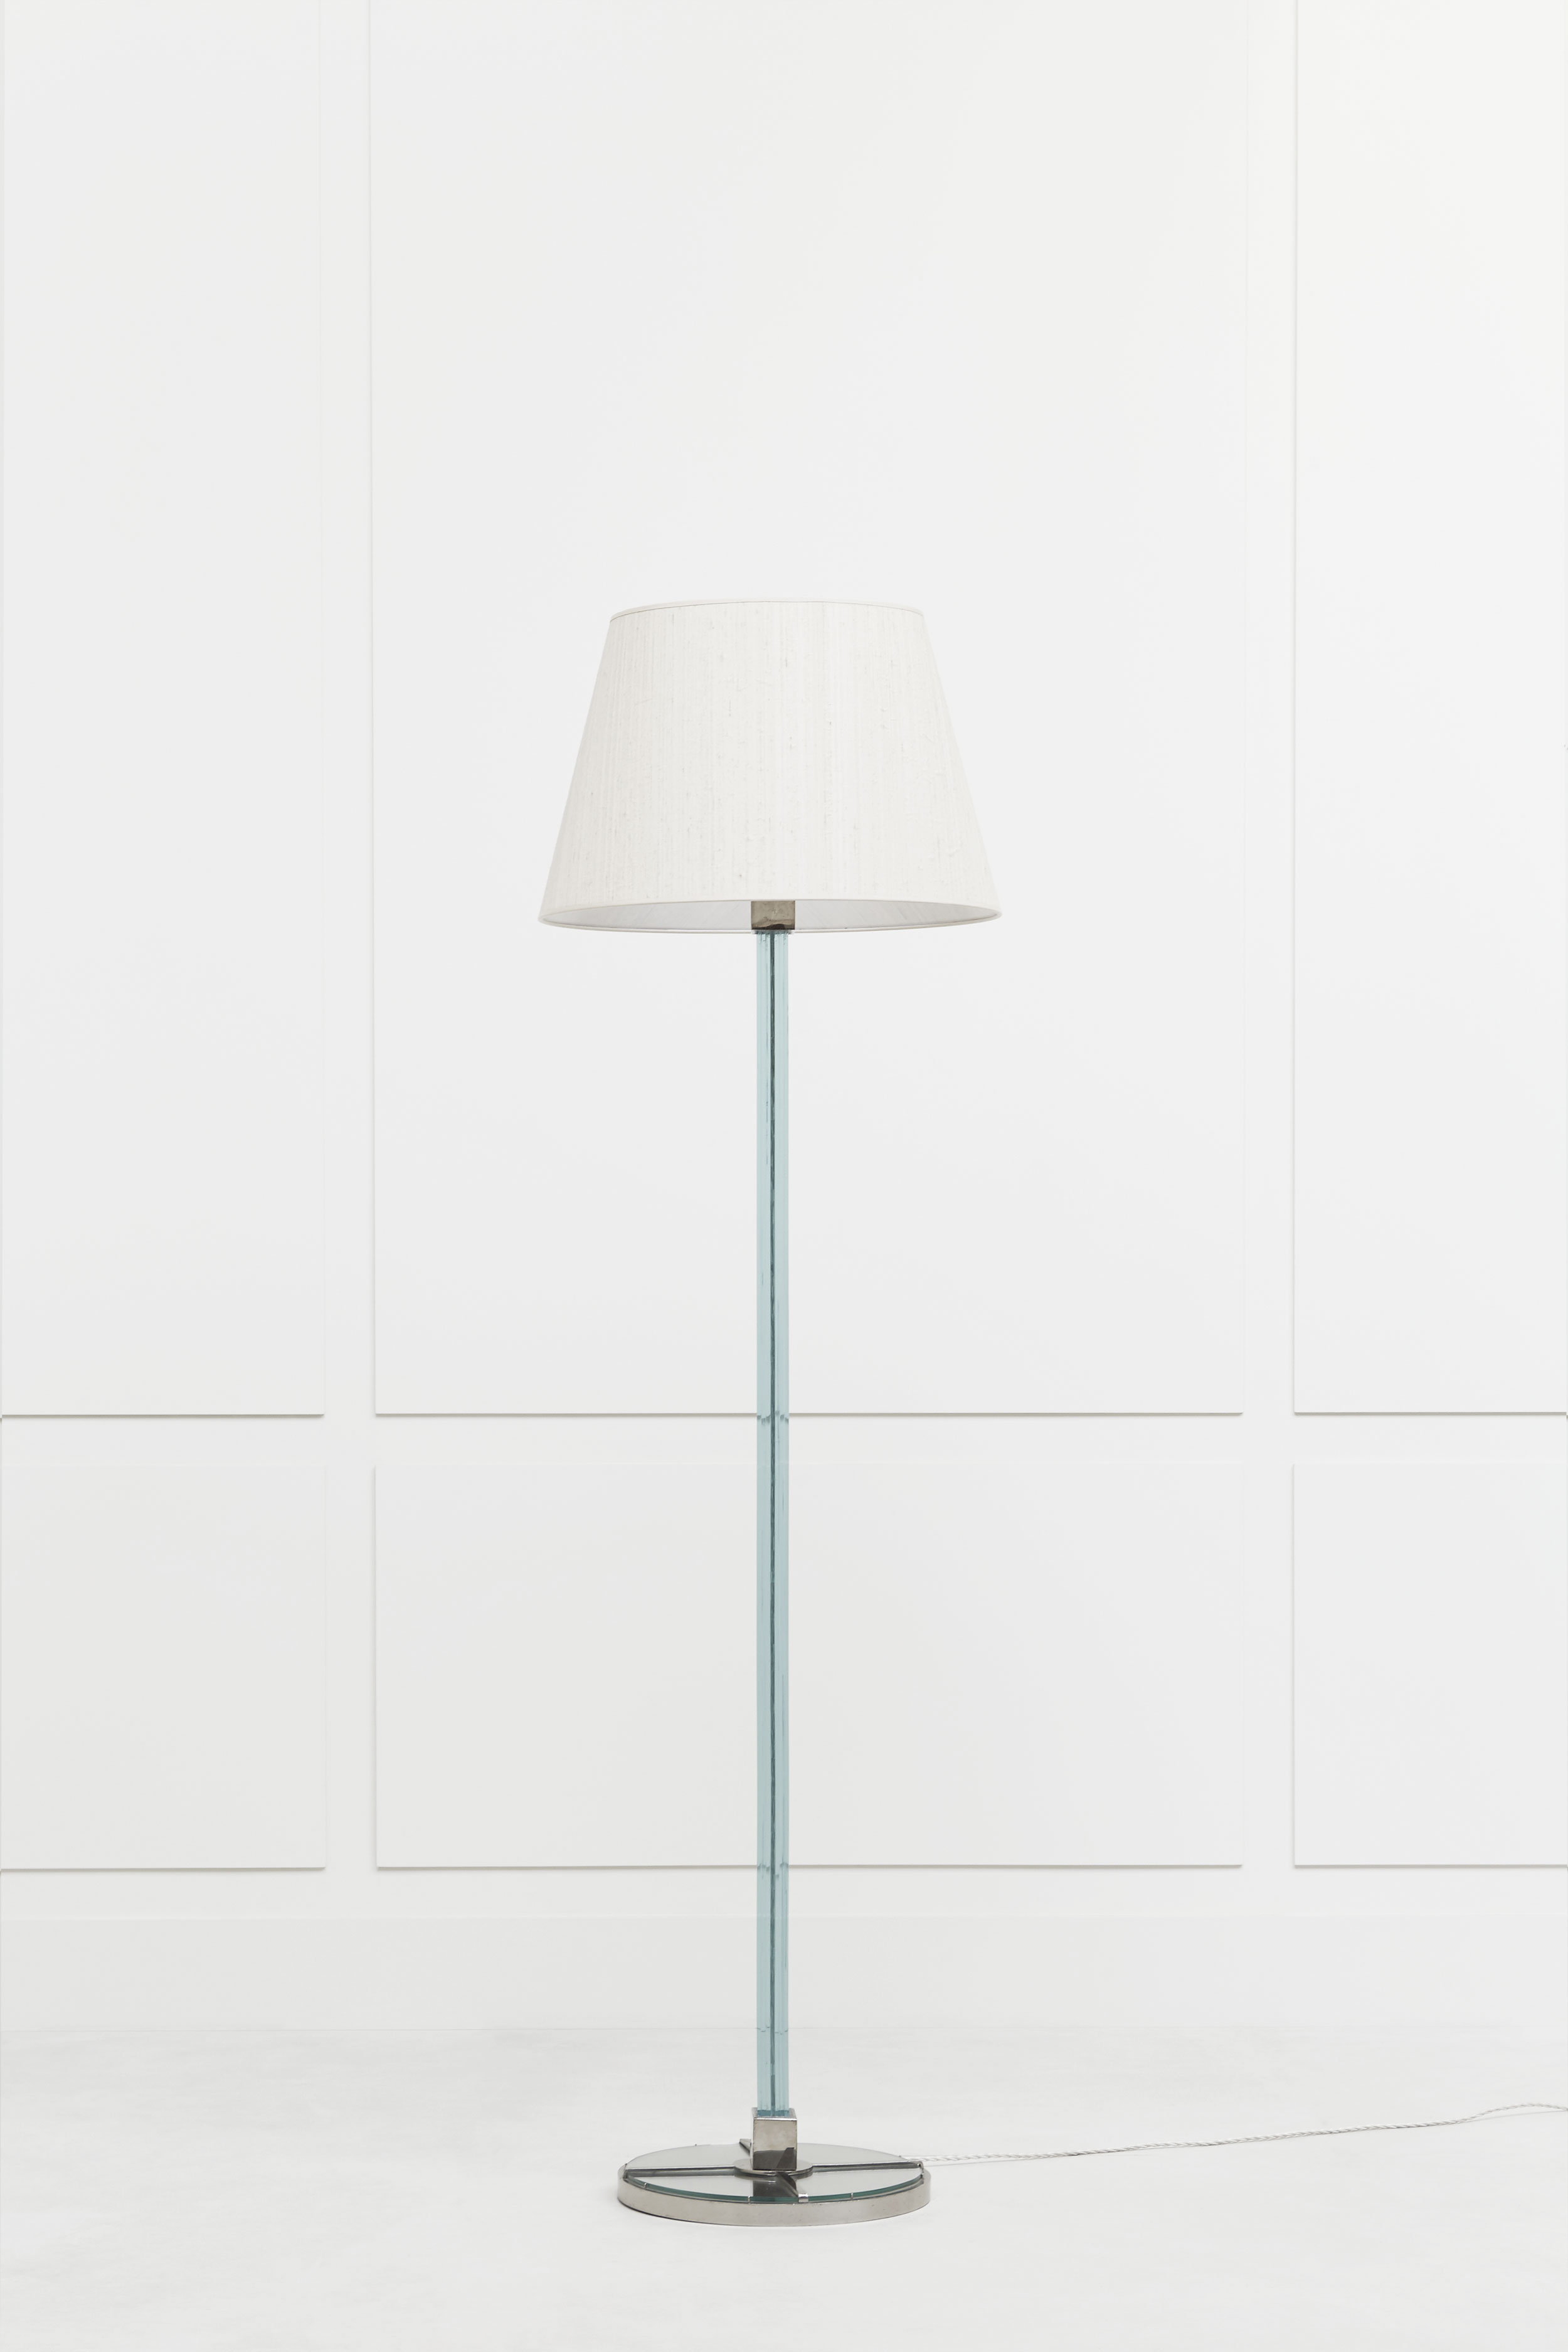 Syrie Maugham, Floor lamp, vue 01